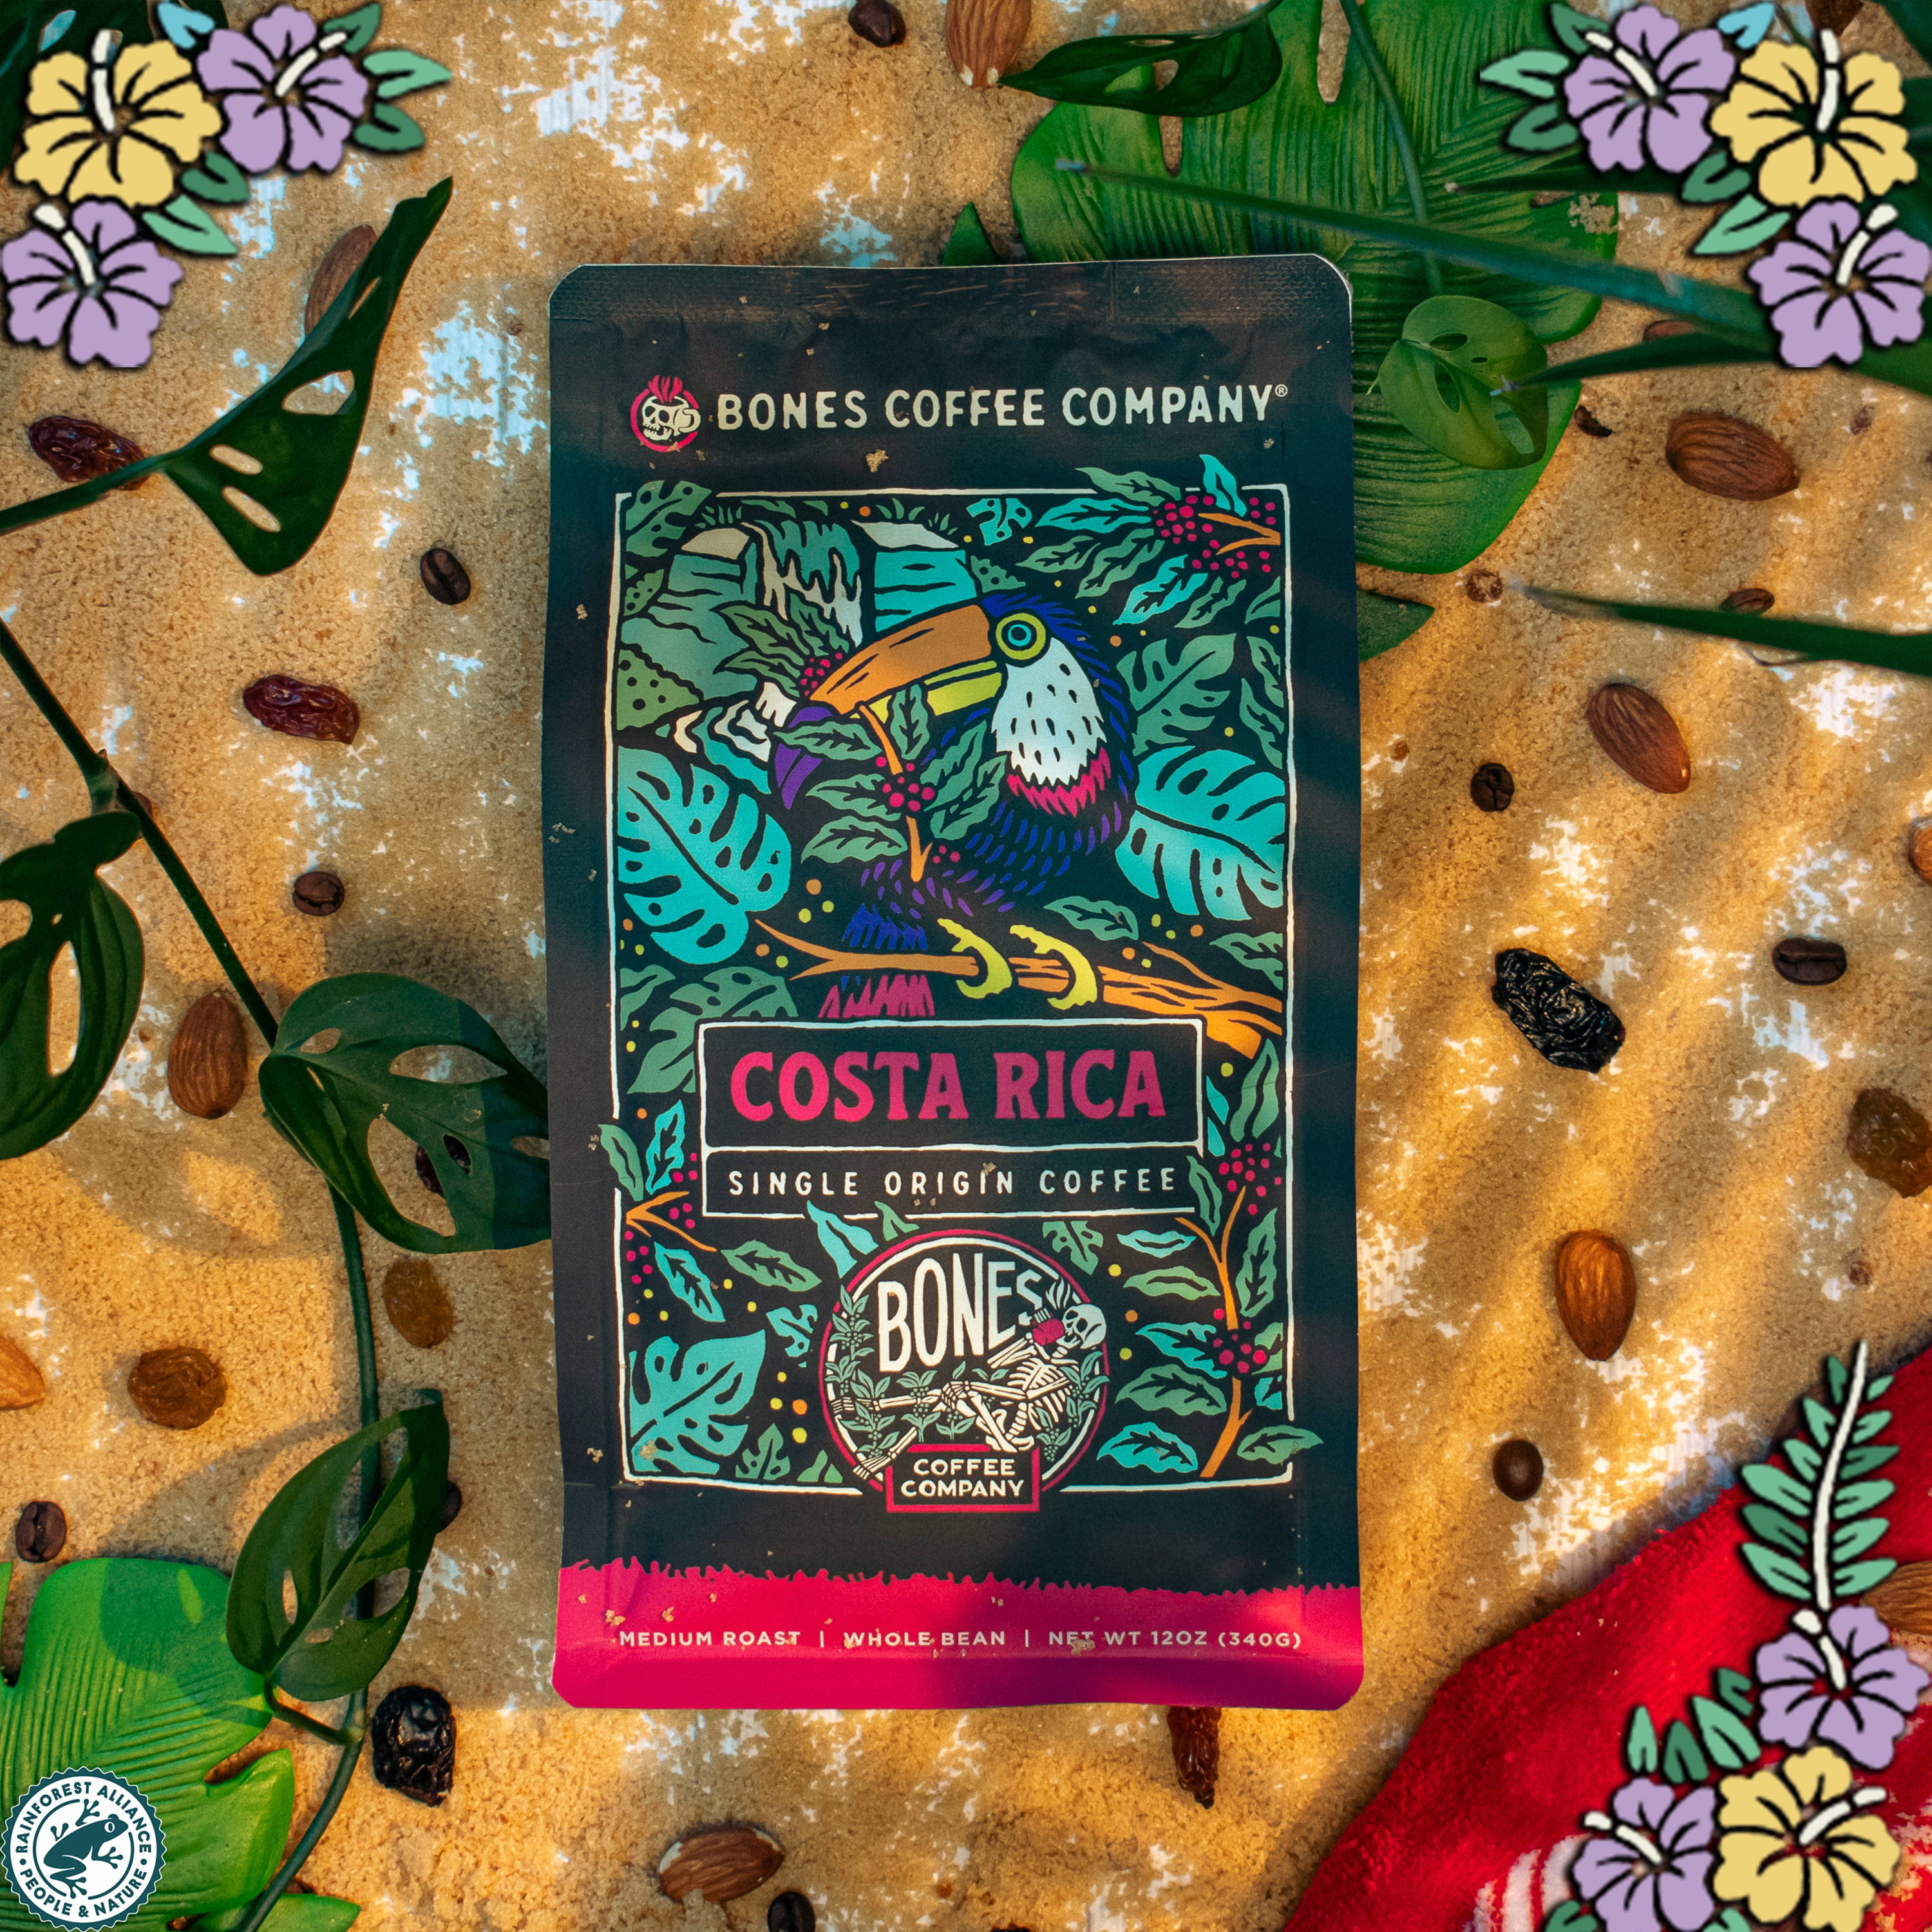 A 12 ounce bag of coffee from Costa Rica that has art of a toucan on it. There are flowers in the top left, top right, and bottom right. There's also the logo for the Rainforest Alliance in the bottom left.